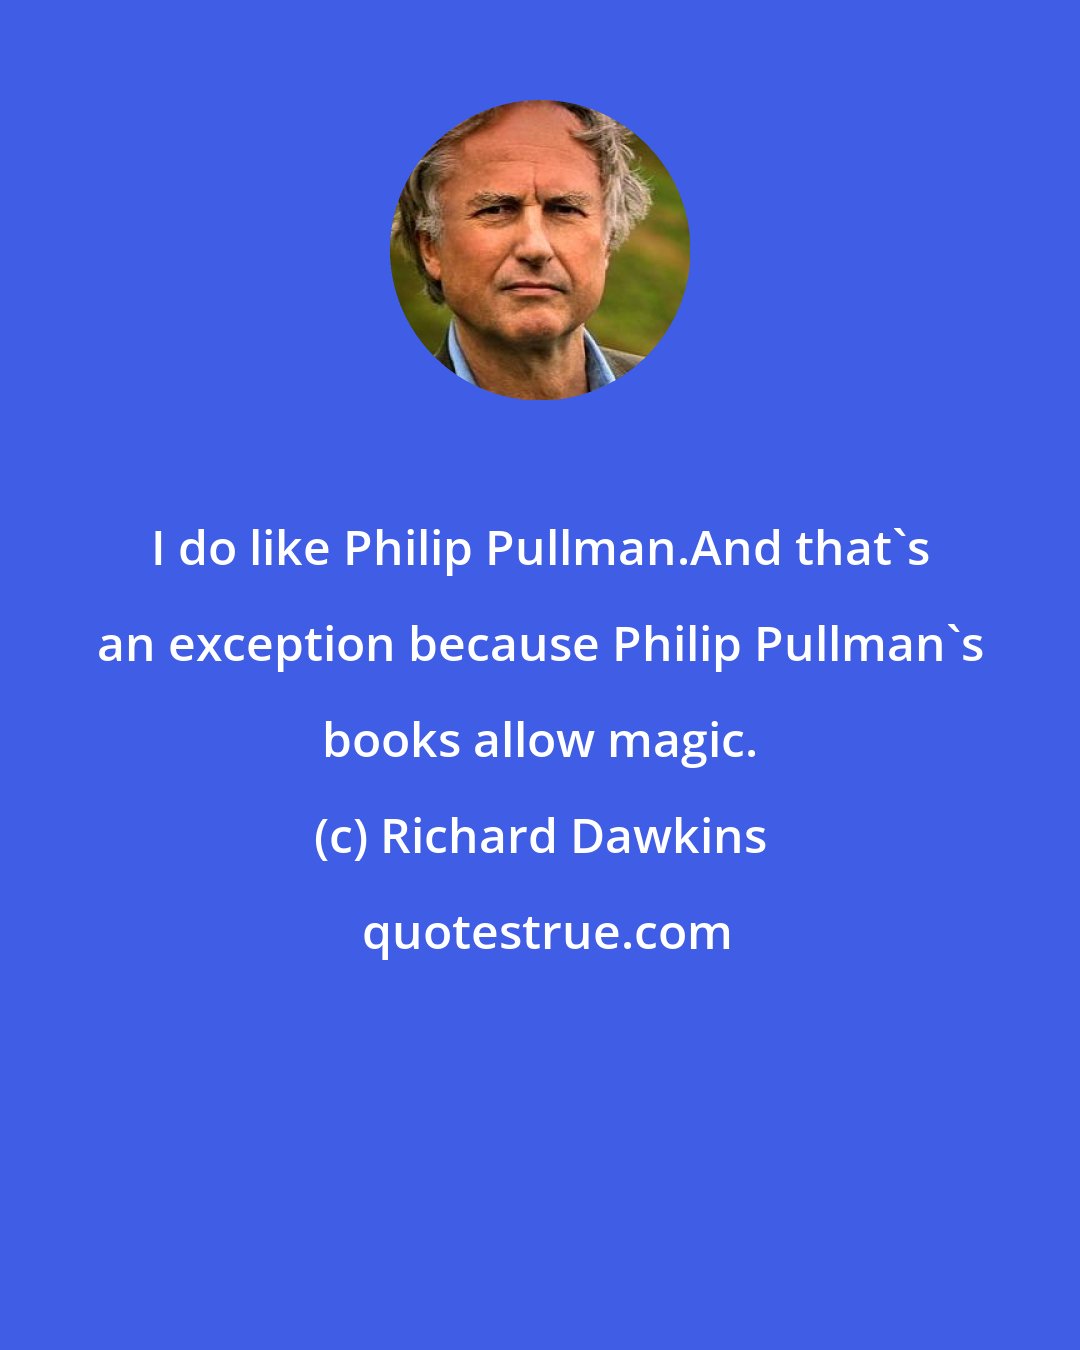 Richard Dawkins: I do like Philip Pullman.And that's an exception because Philip Pullman's books allow magic.